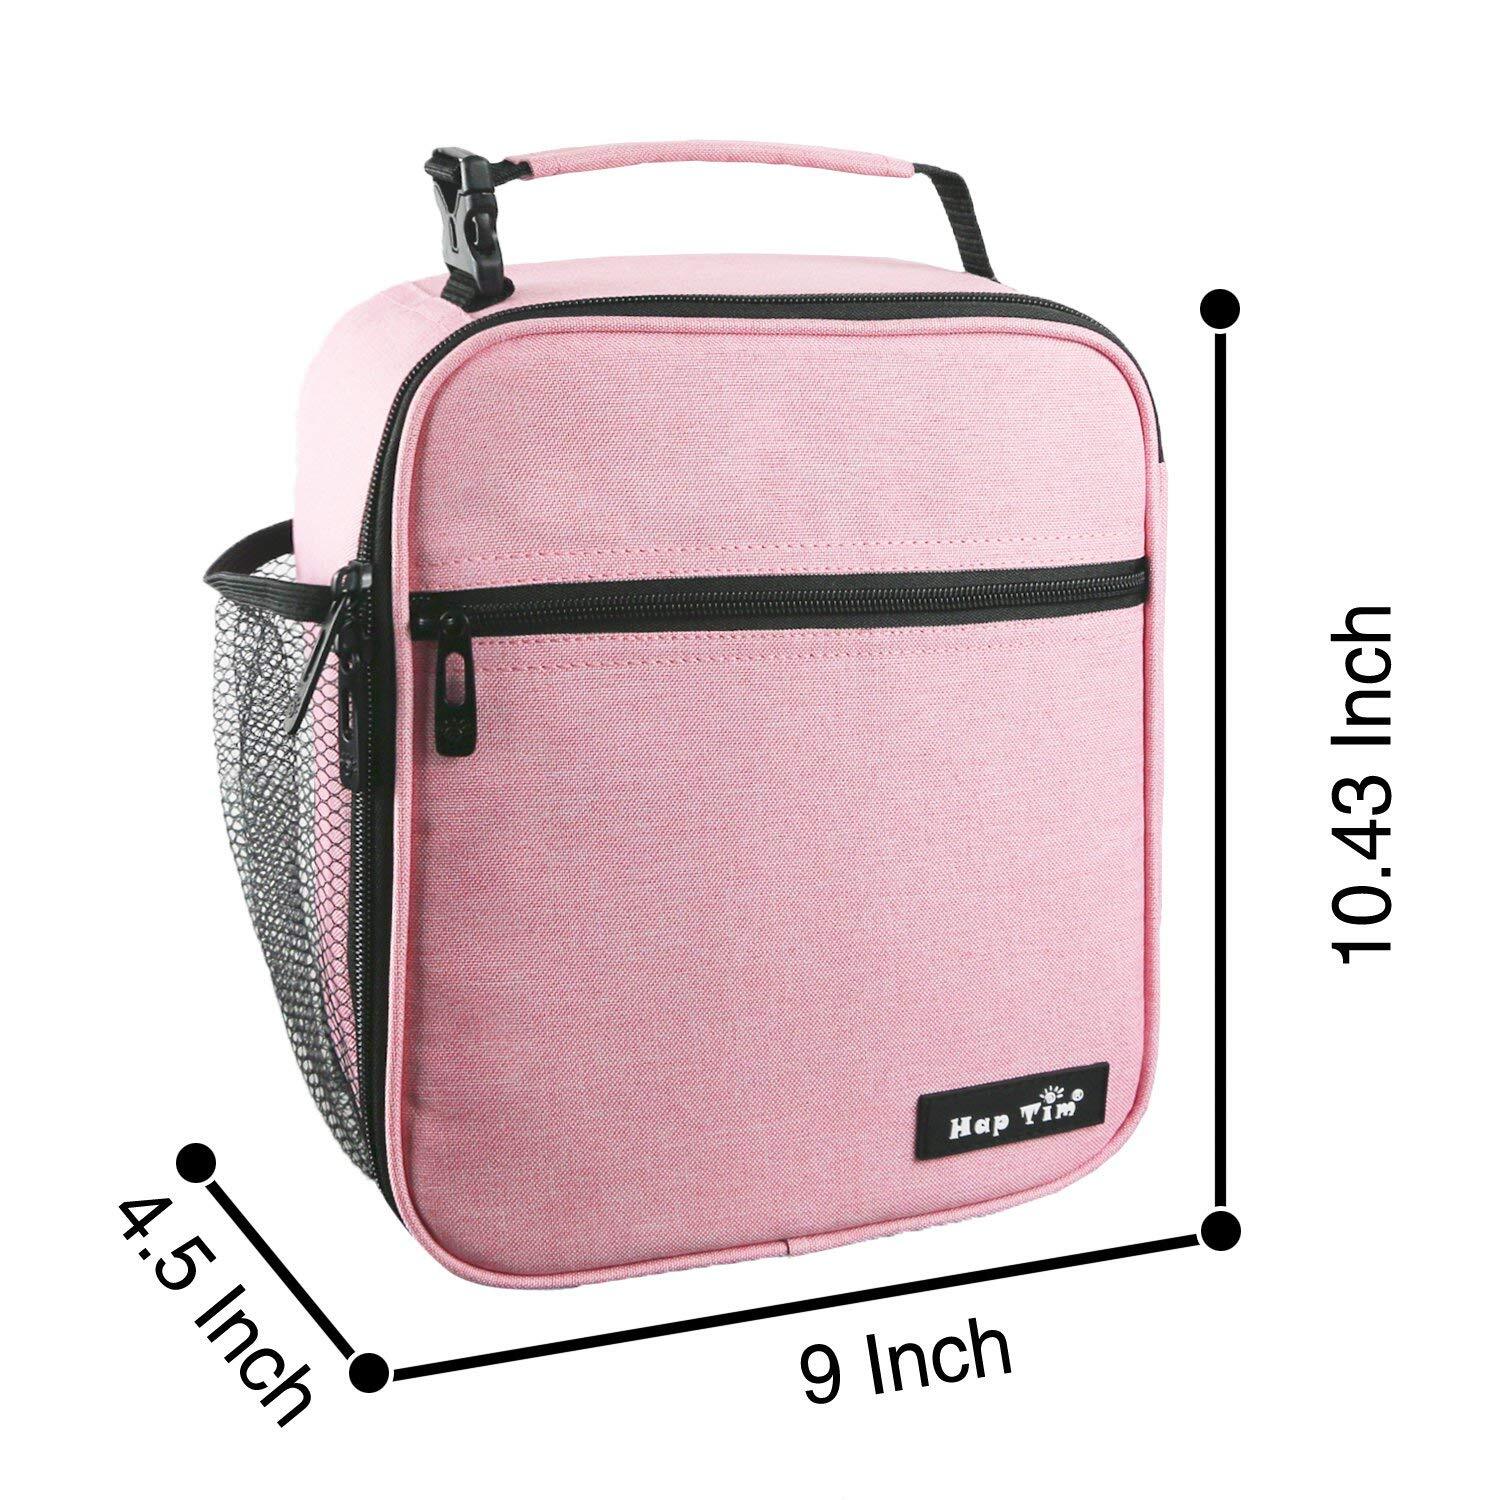 https://images.51microshop.com/1658/product/20180927/Hap_Tim_Insulated_Lunch_Bag_Women_Girls_Reusable_Lunch_Box_Kids_Girls_Spacious_Lunchbox_Adult_Cooler_Bag_18654_PK__1538012501068_3.jpg